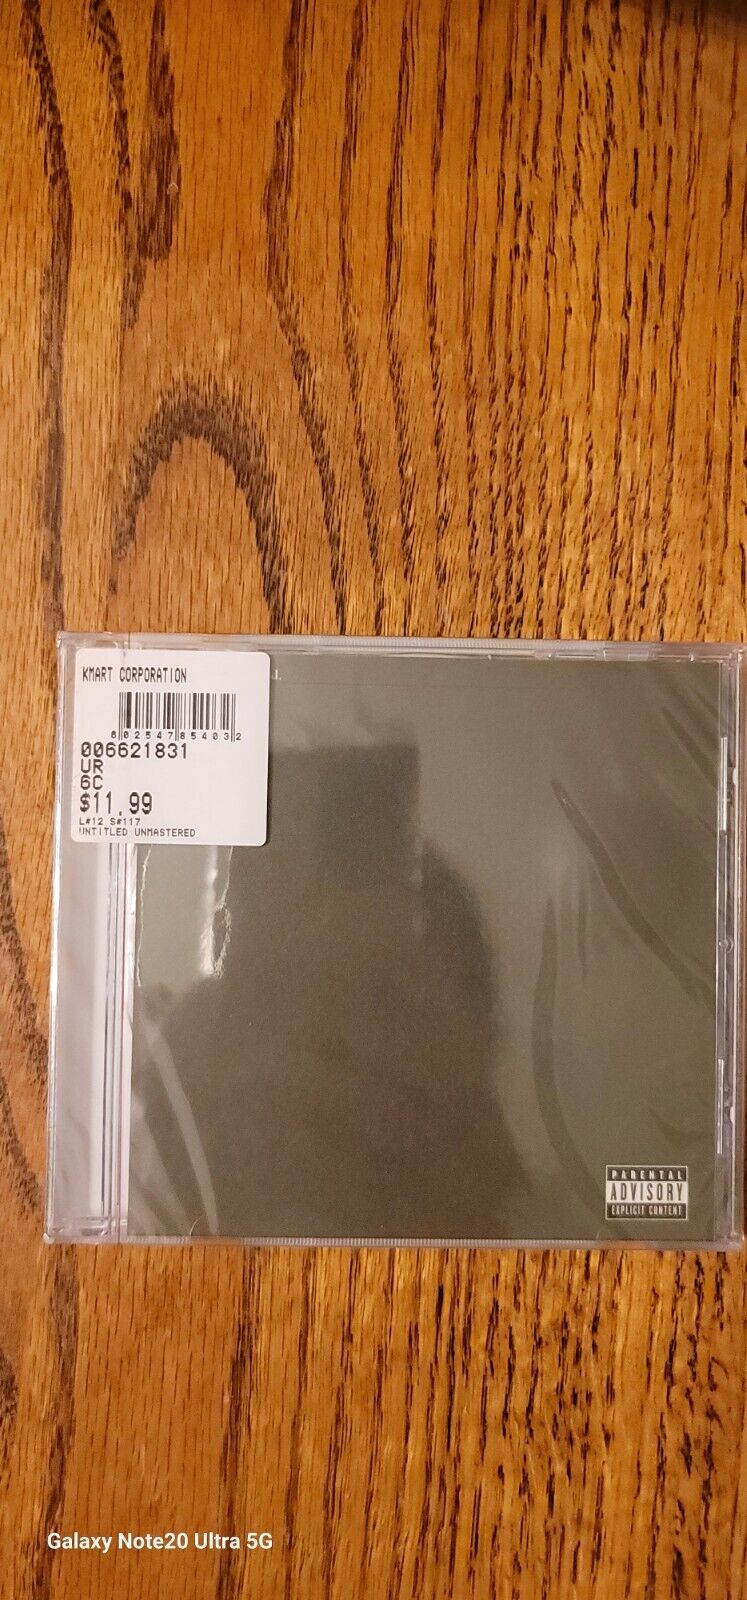 untitled unmastered. by Lamar, Kendrick (CD, 2016) - BRAND NEW